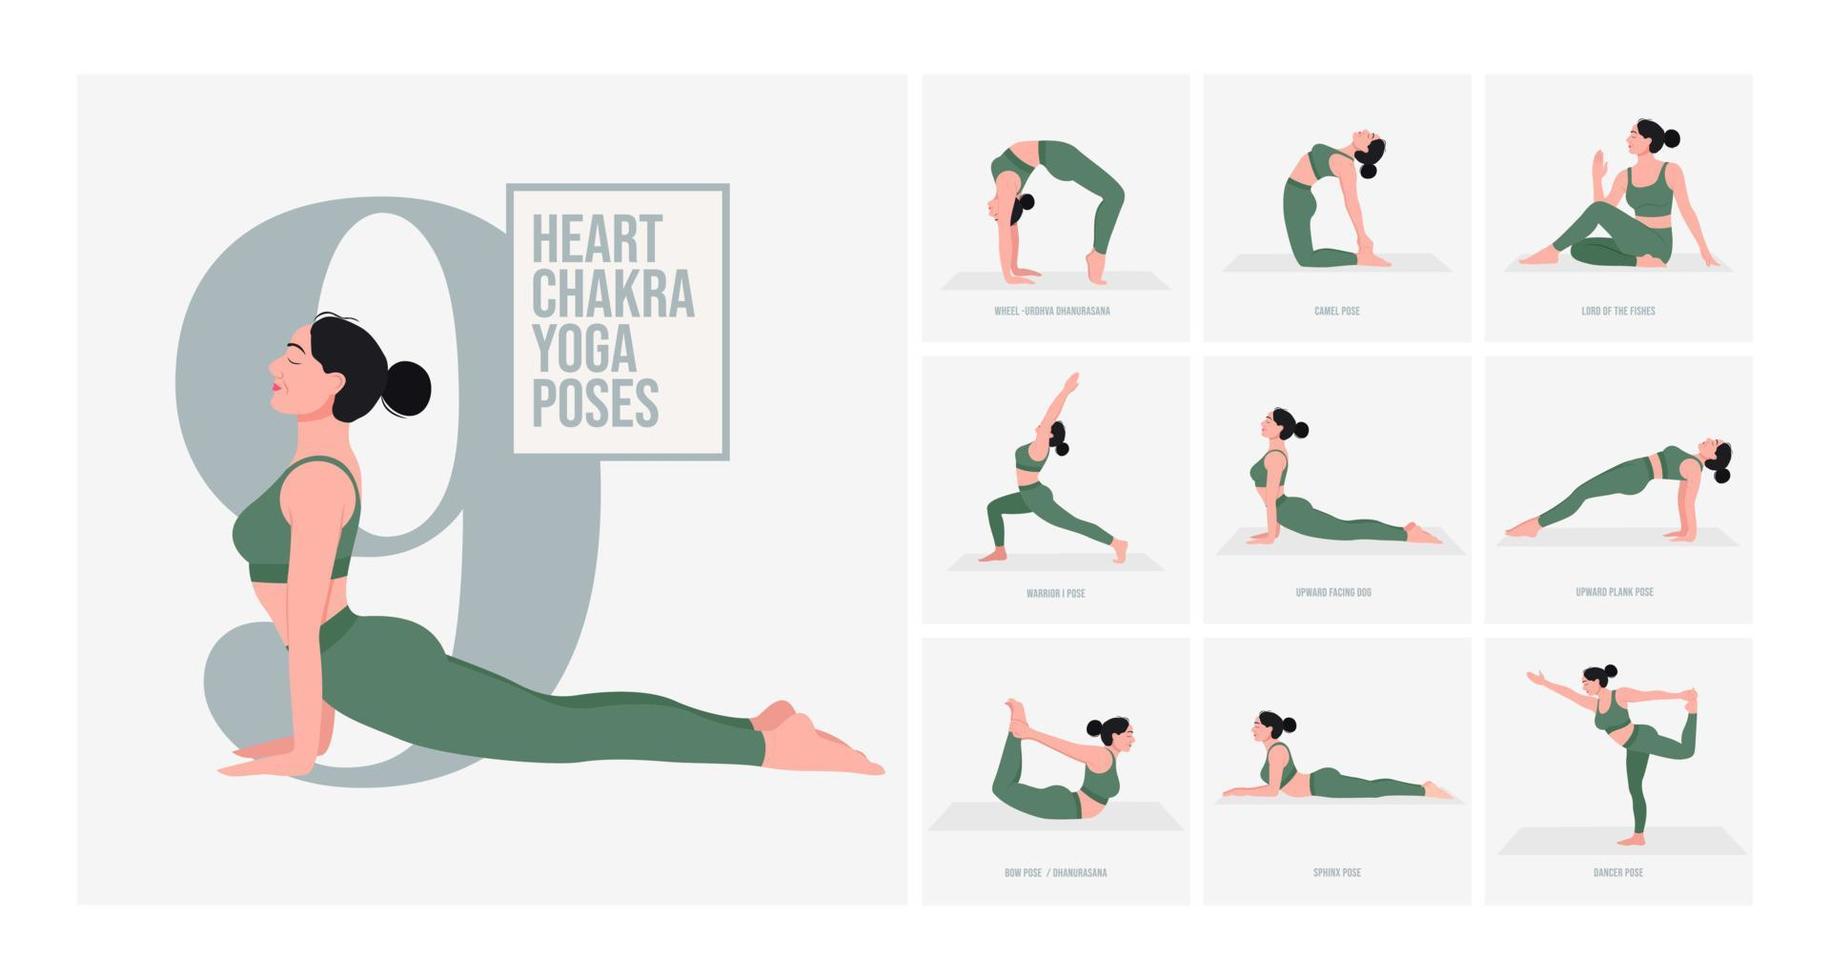 10 Best Yoga Poses For The Heart Chakra - Everything Yoga Retreat